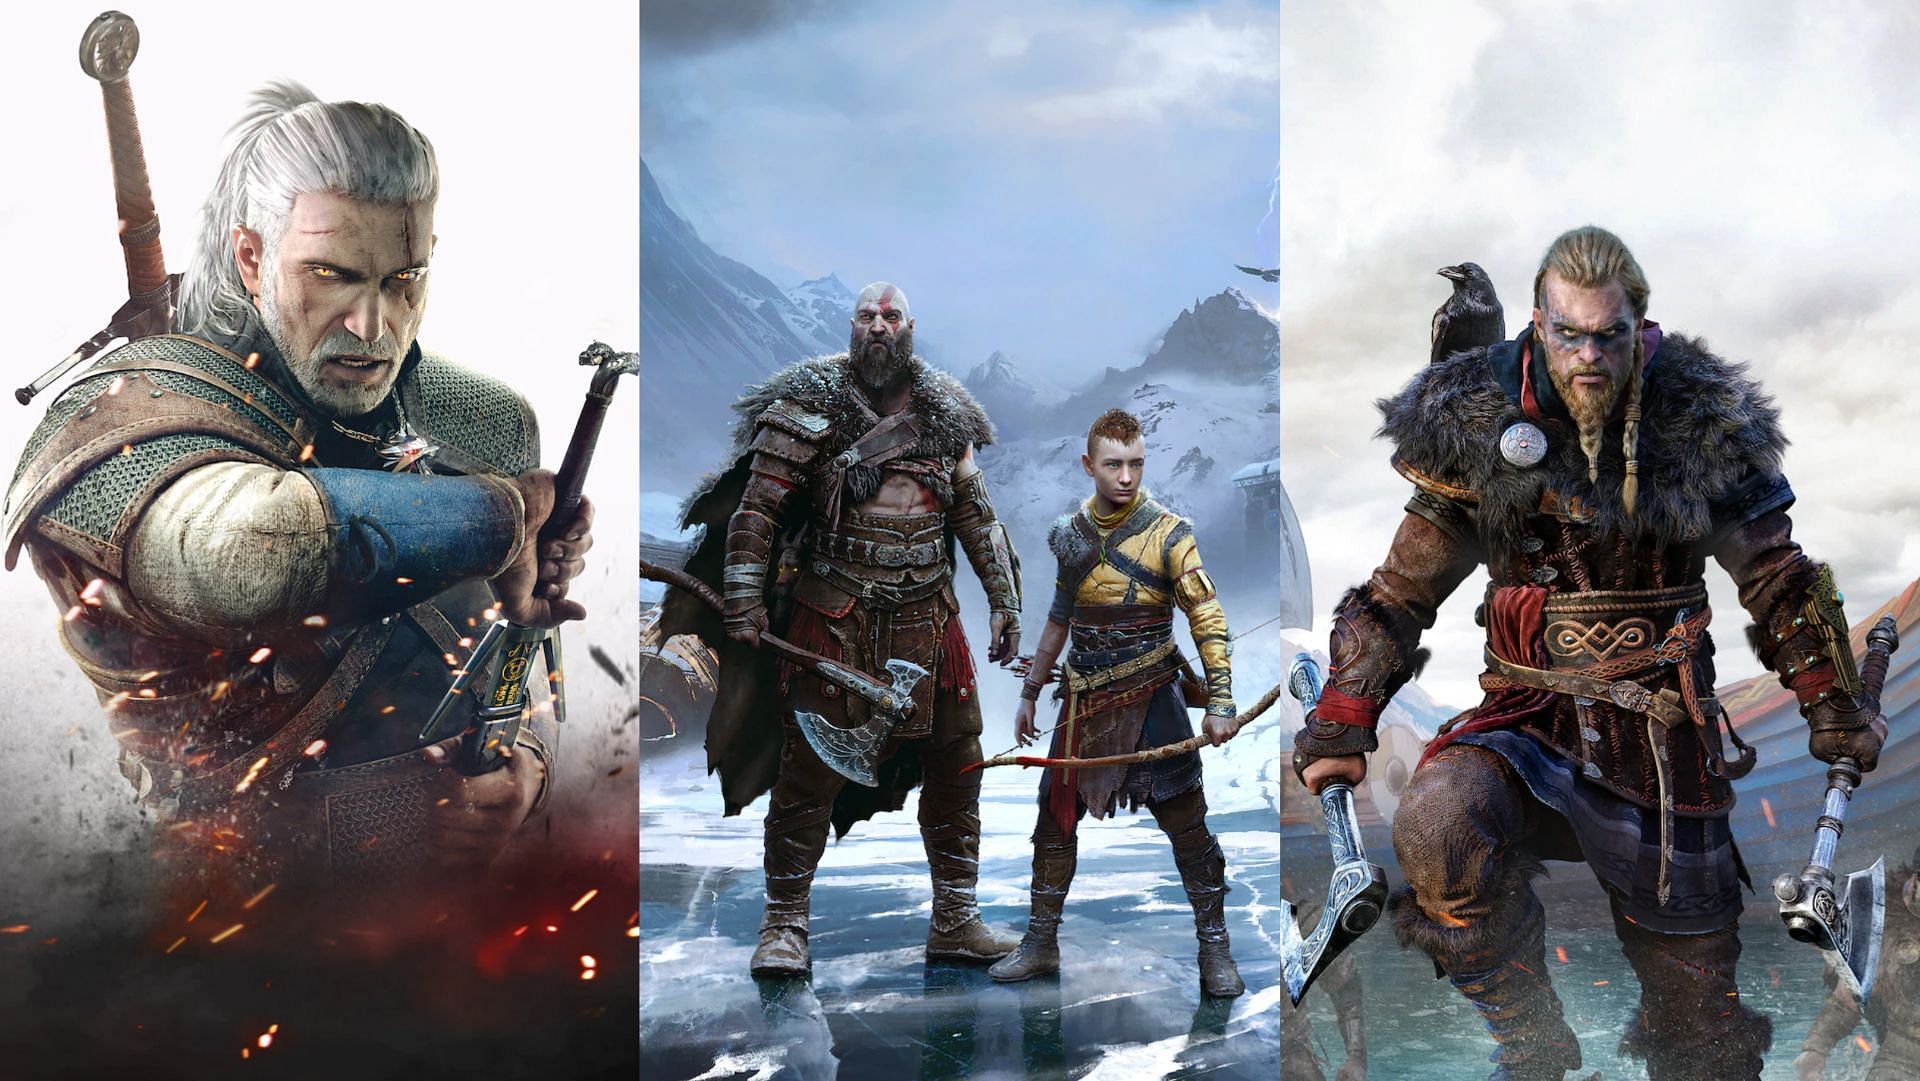 Thor in God of War vs Thor in Assassin's Creed Valhalla 